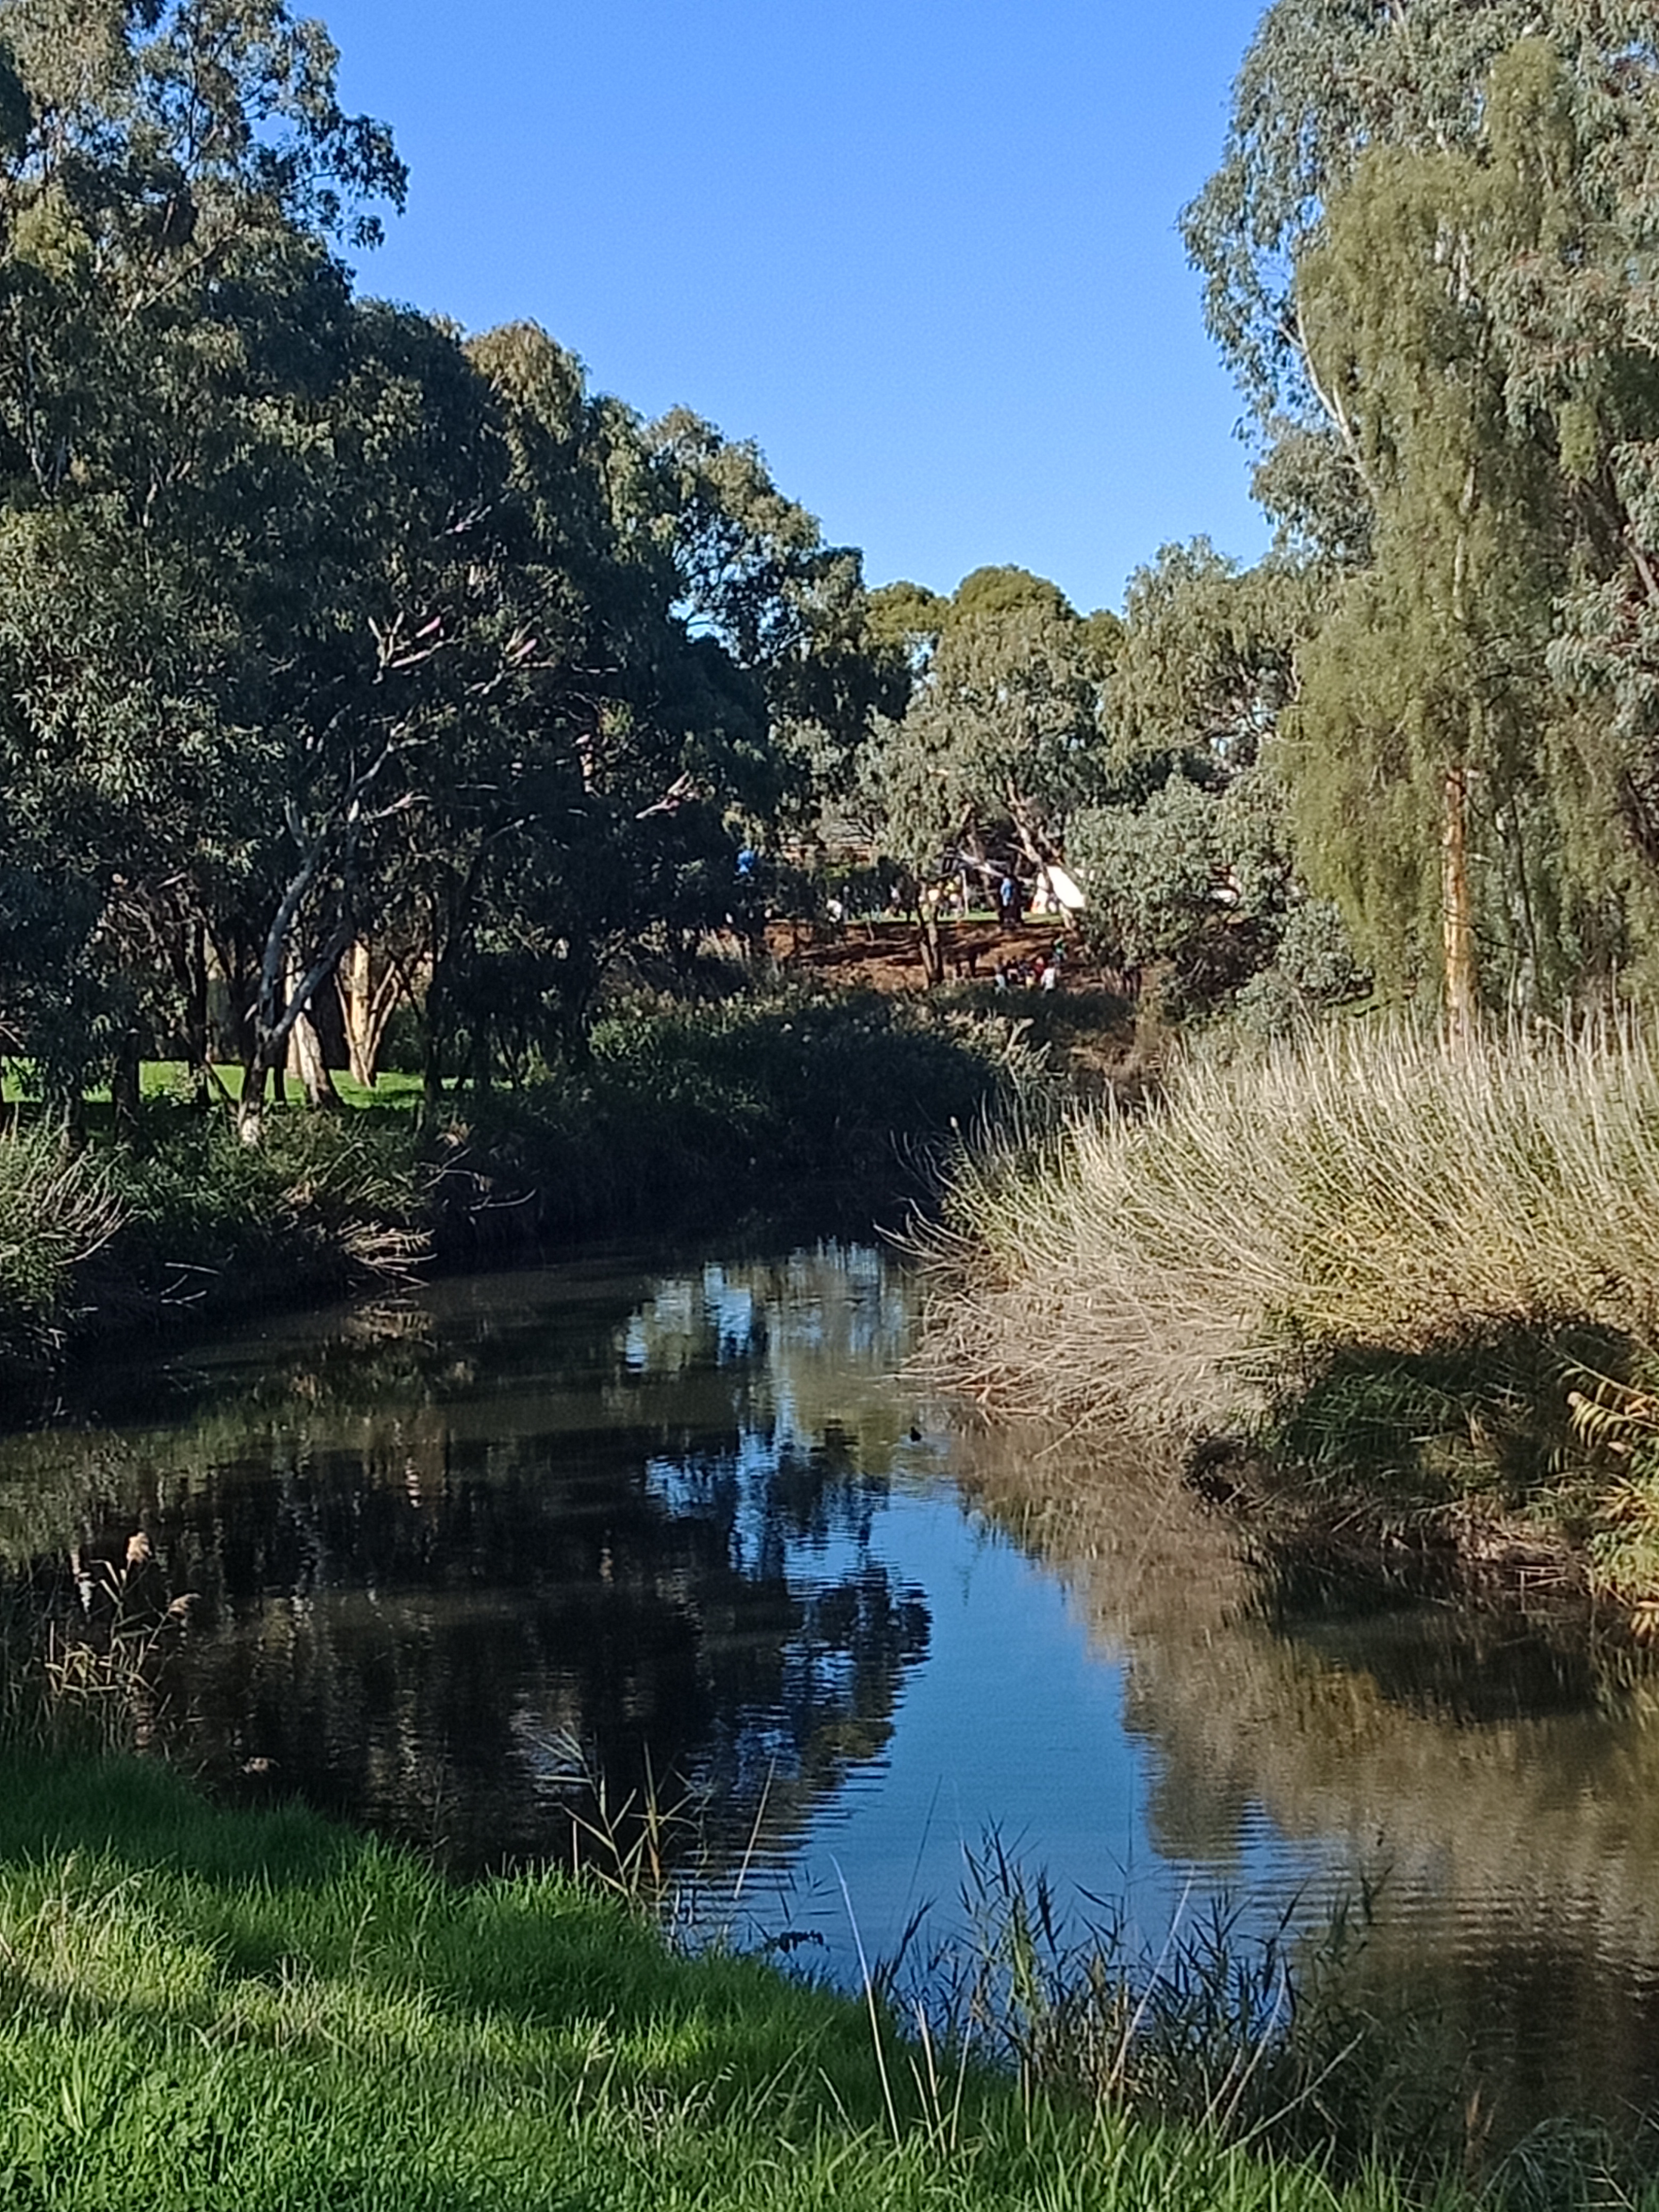 The River Torrens flows through the City of West Torrens. Its natural landscape and biodiversity provides a wonderful setting for people visiting the River Torrens Linear Park. Council has been active in re-vegetating the river bank and hosts community planting events each year, has created native bee 'hotels', and also set up several nature play spaces for families to enjoy.